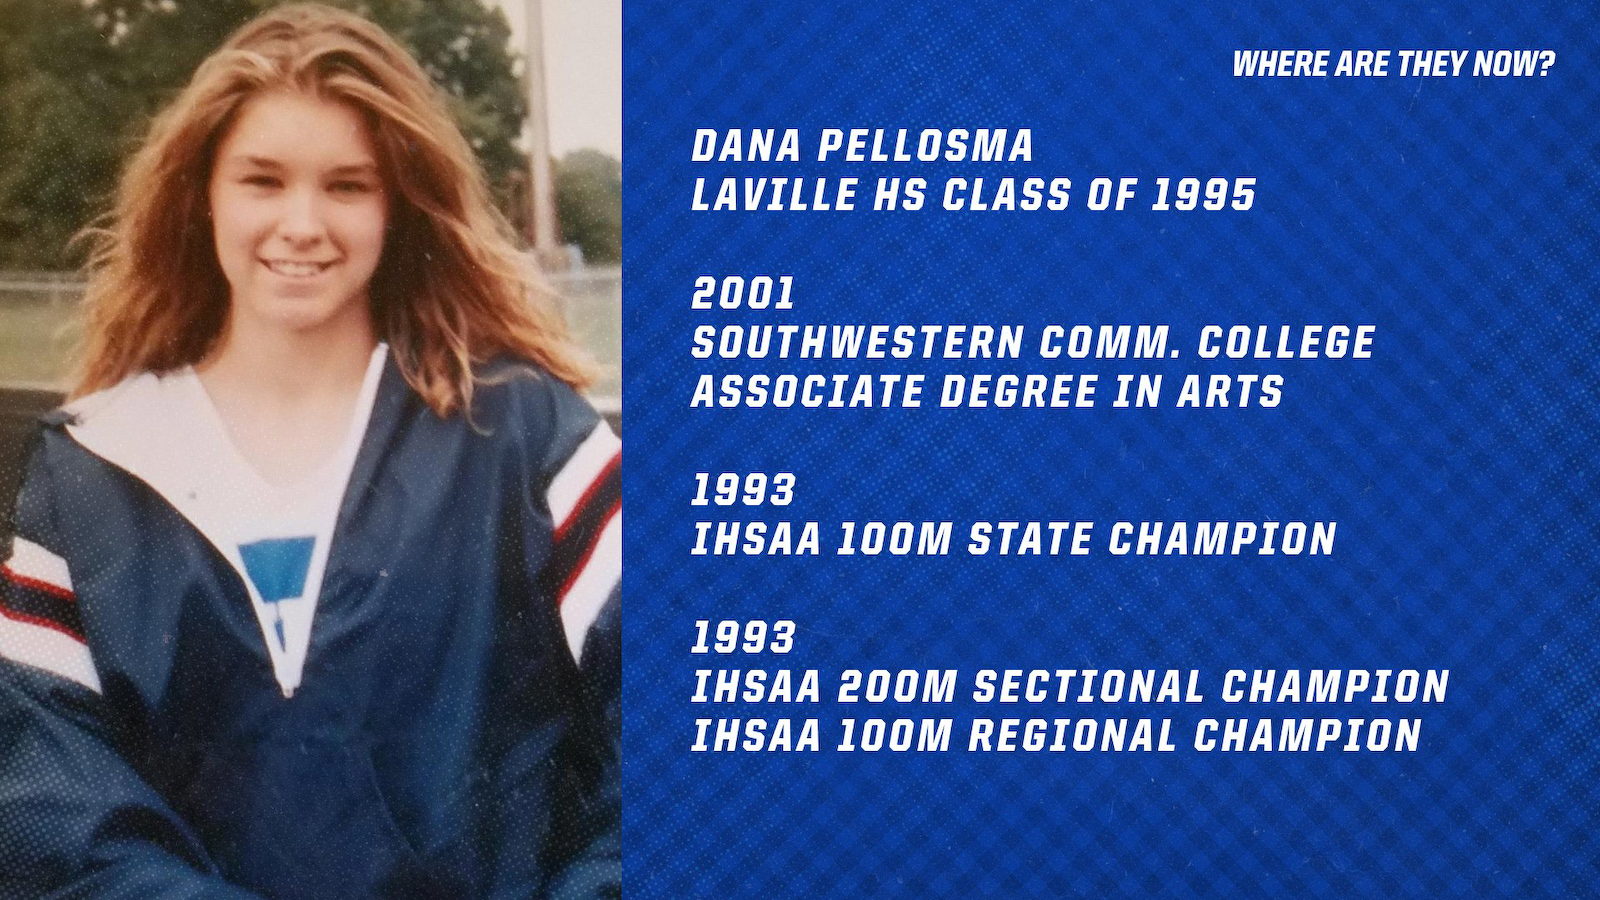 WHERE ARE THEY NOW? – Dana Pellosma, LaVille HS Class of 1995 cover photo